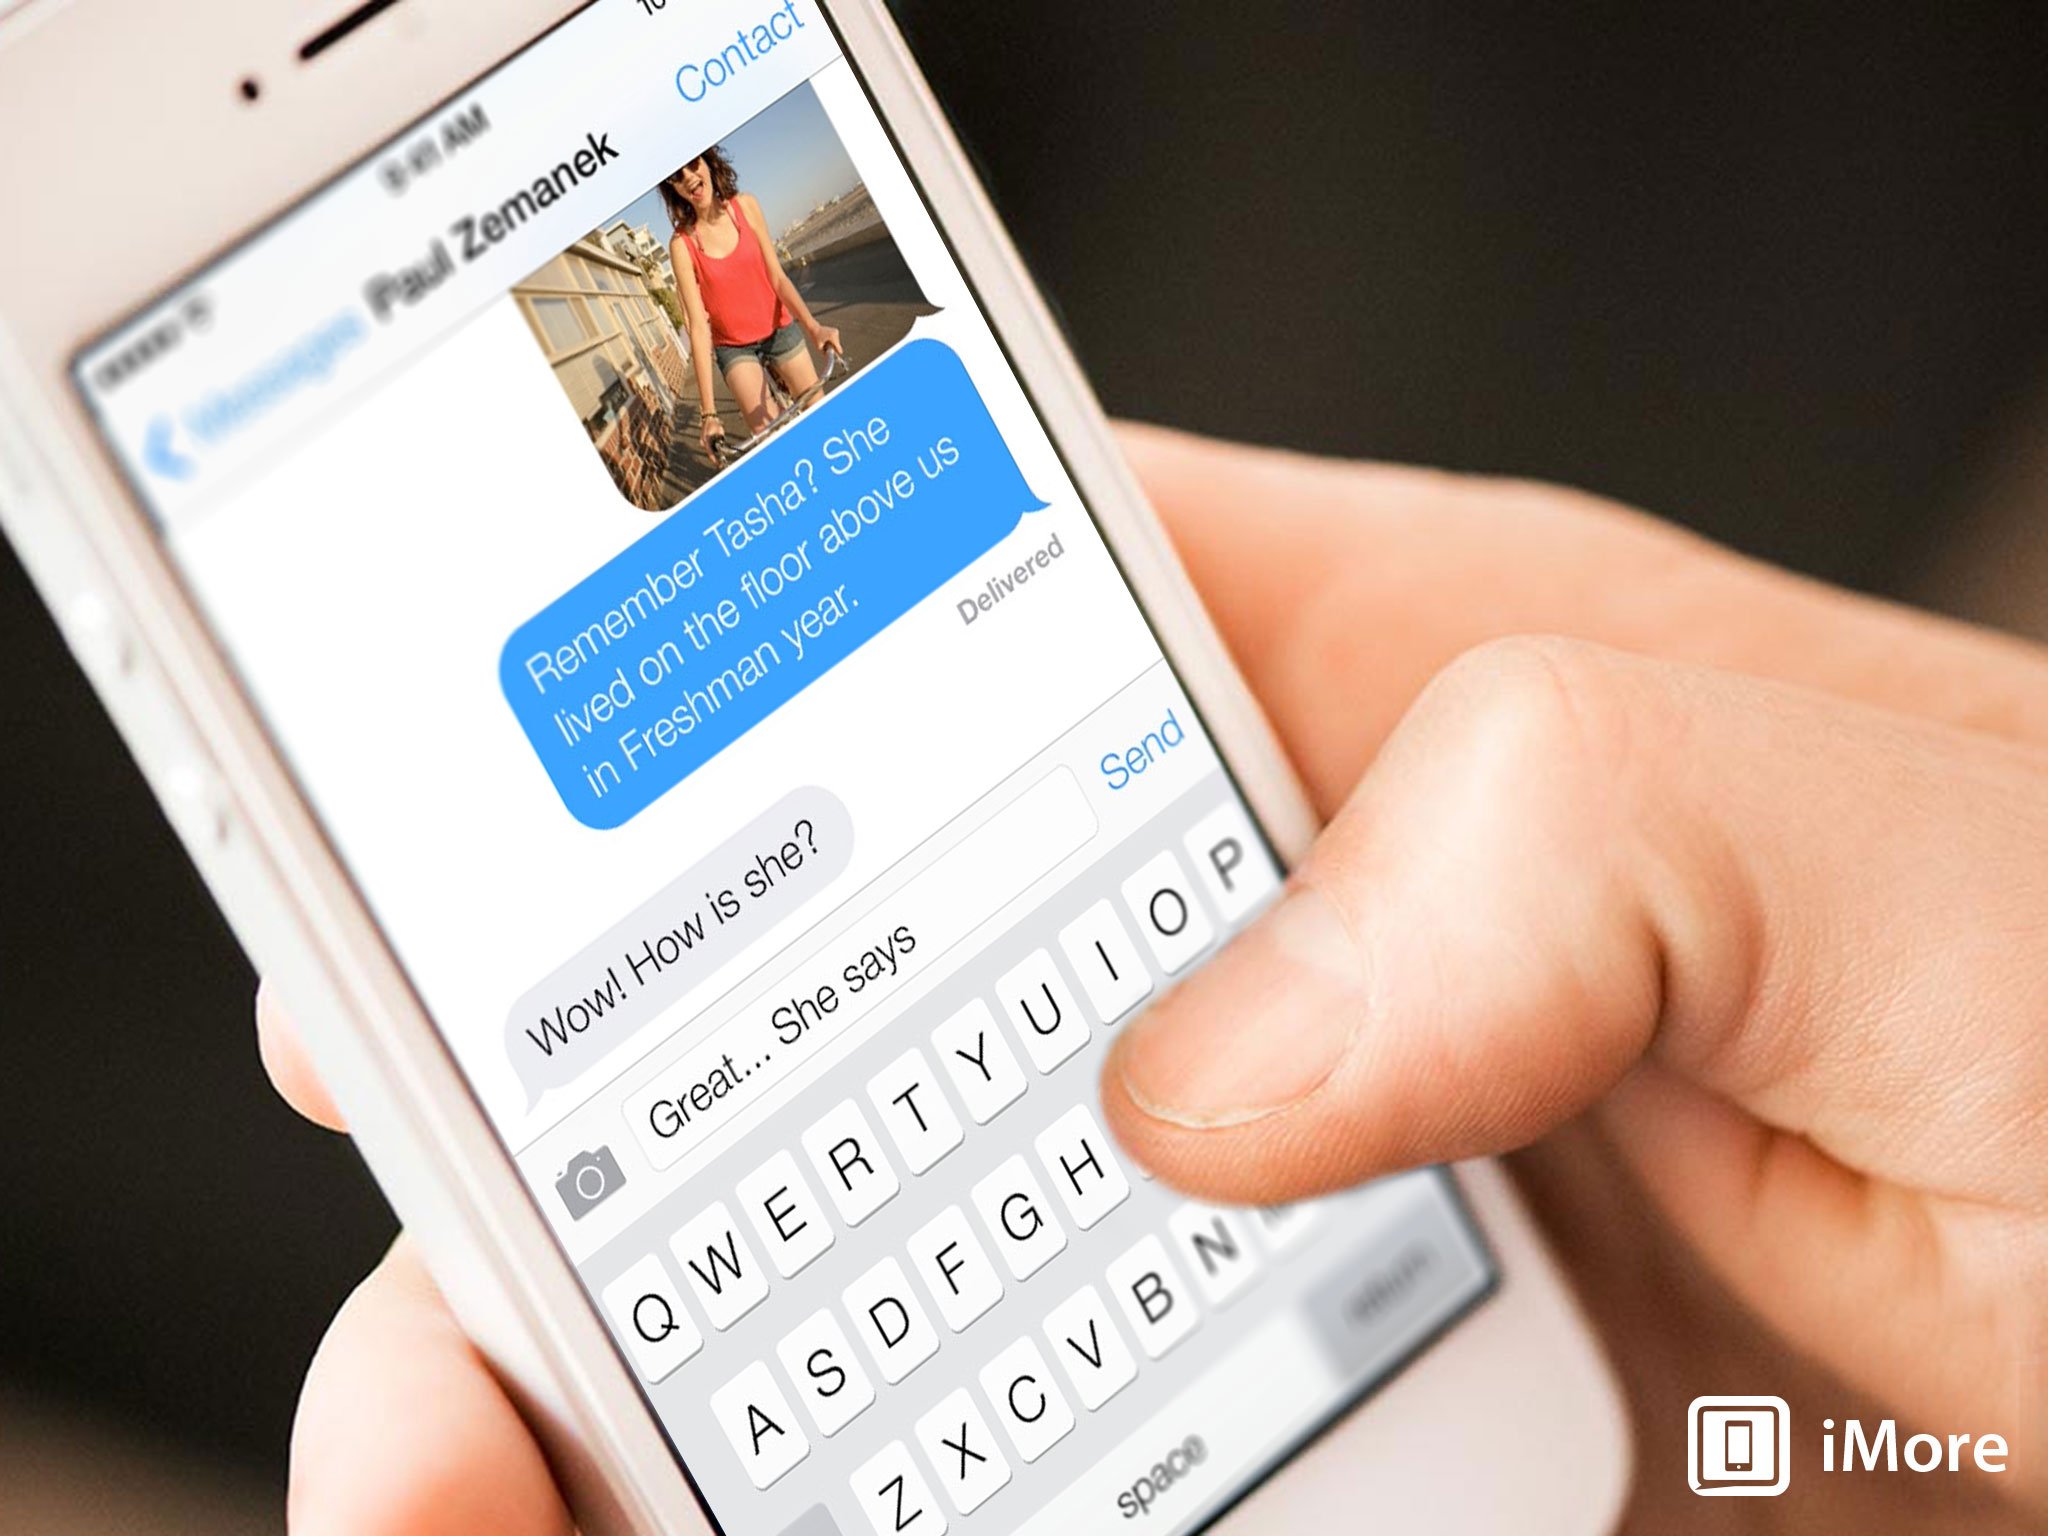 Apple says theoretical exploits be damned, they can't read your iMessages